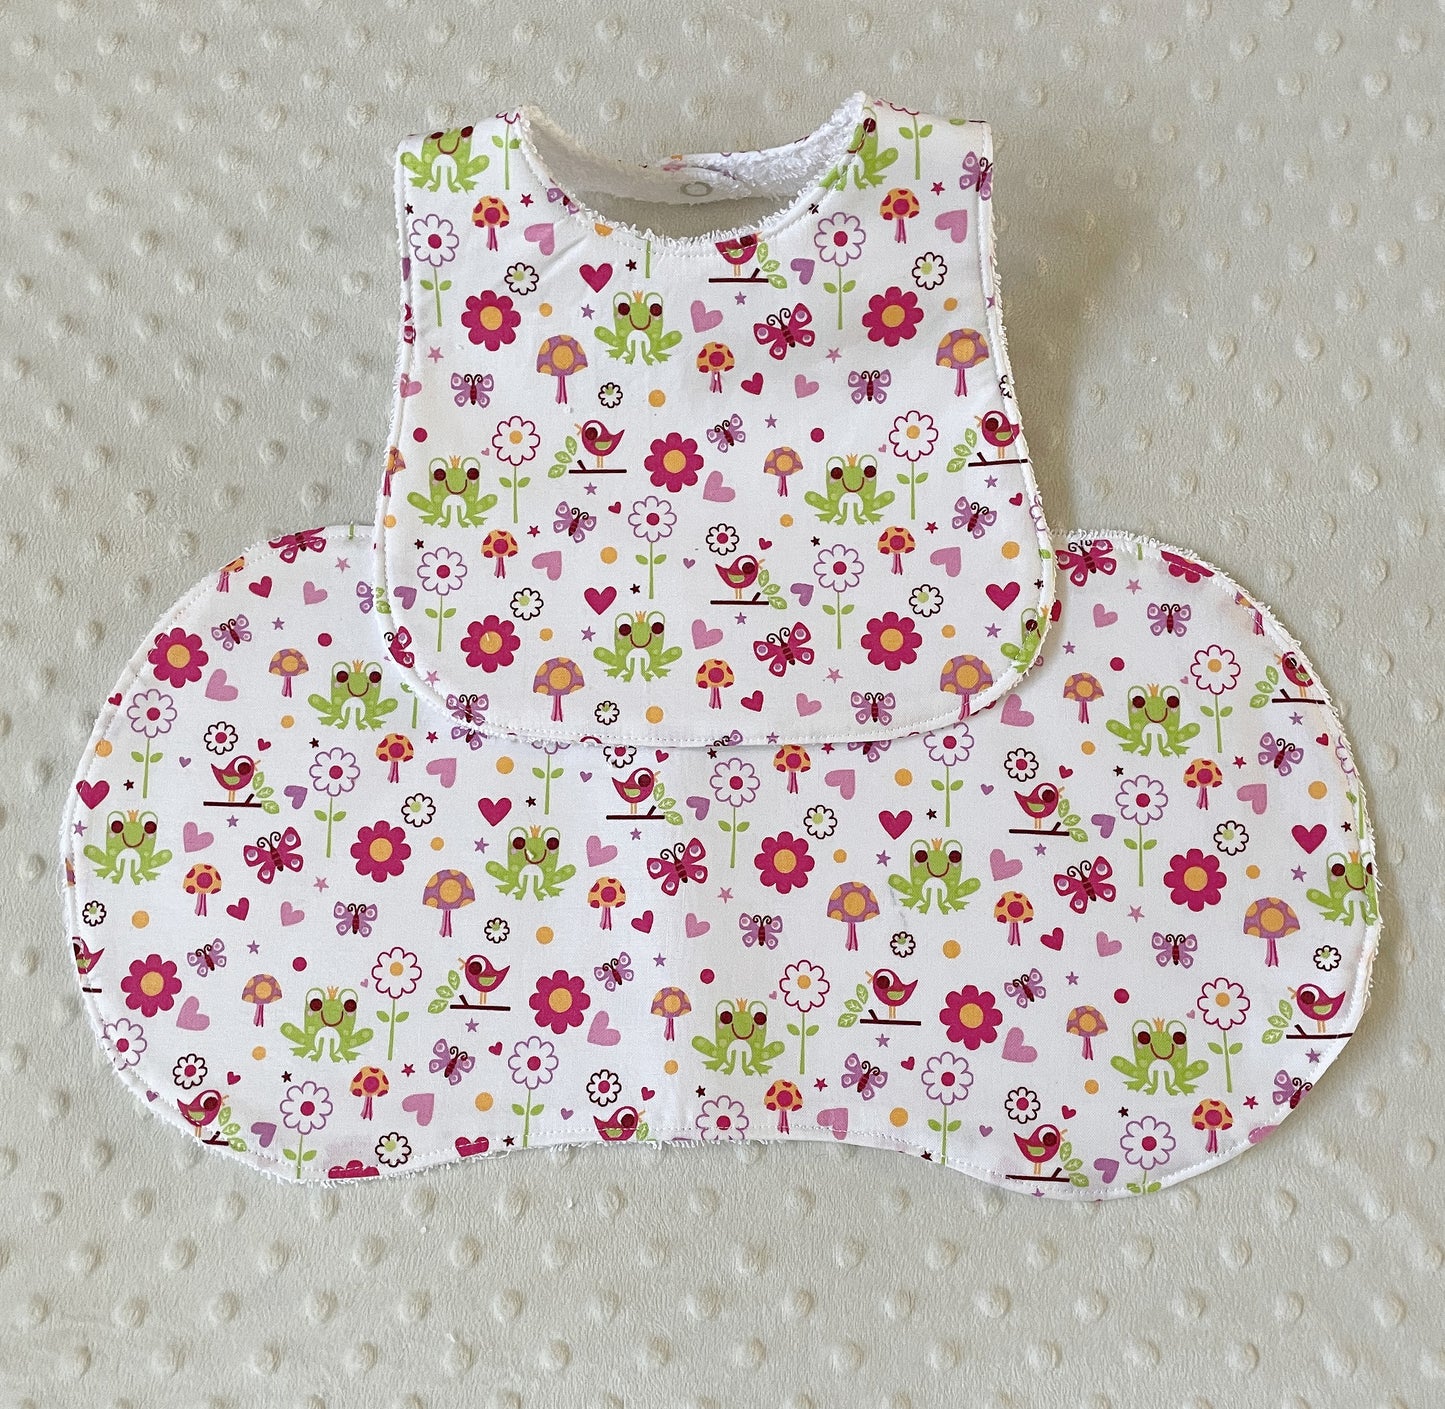 Sweet Baby Girl Shower Gift: Bib and Burp Cloth Set with Flowers and Animals